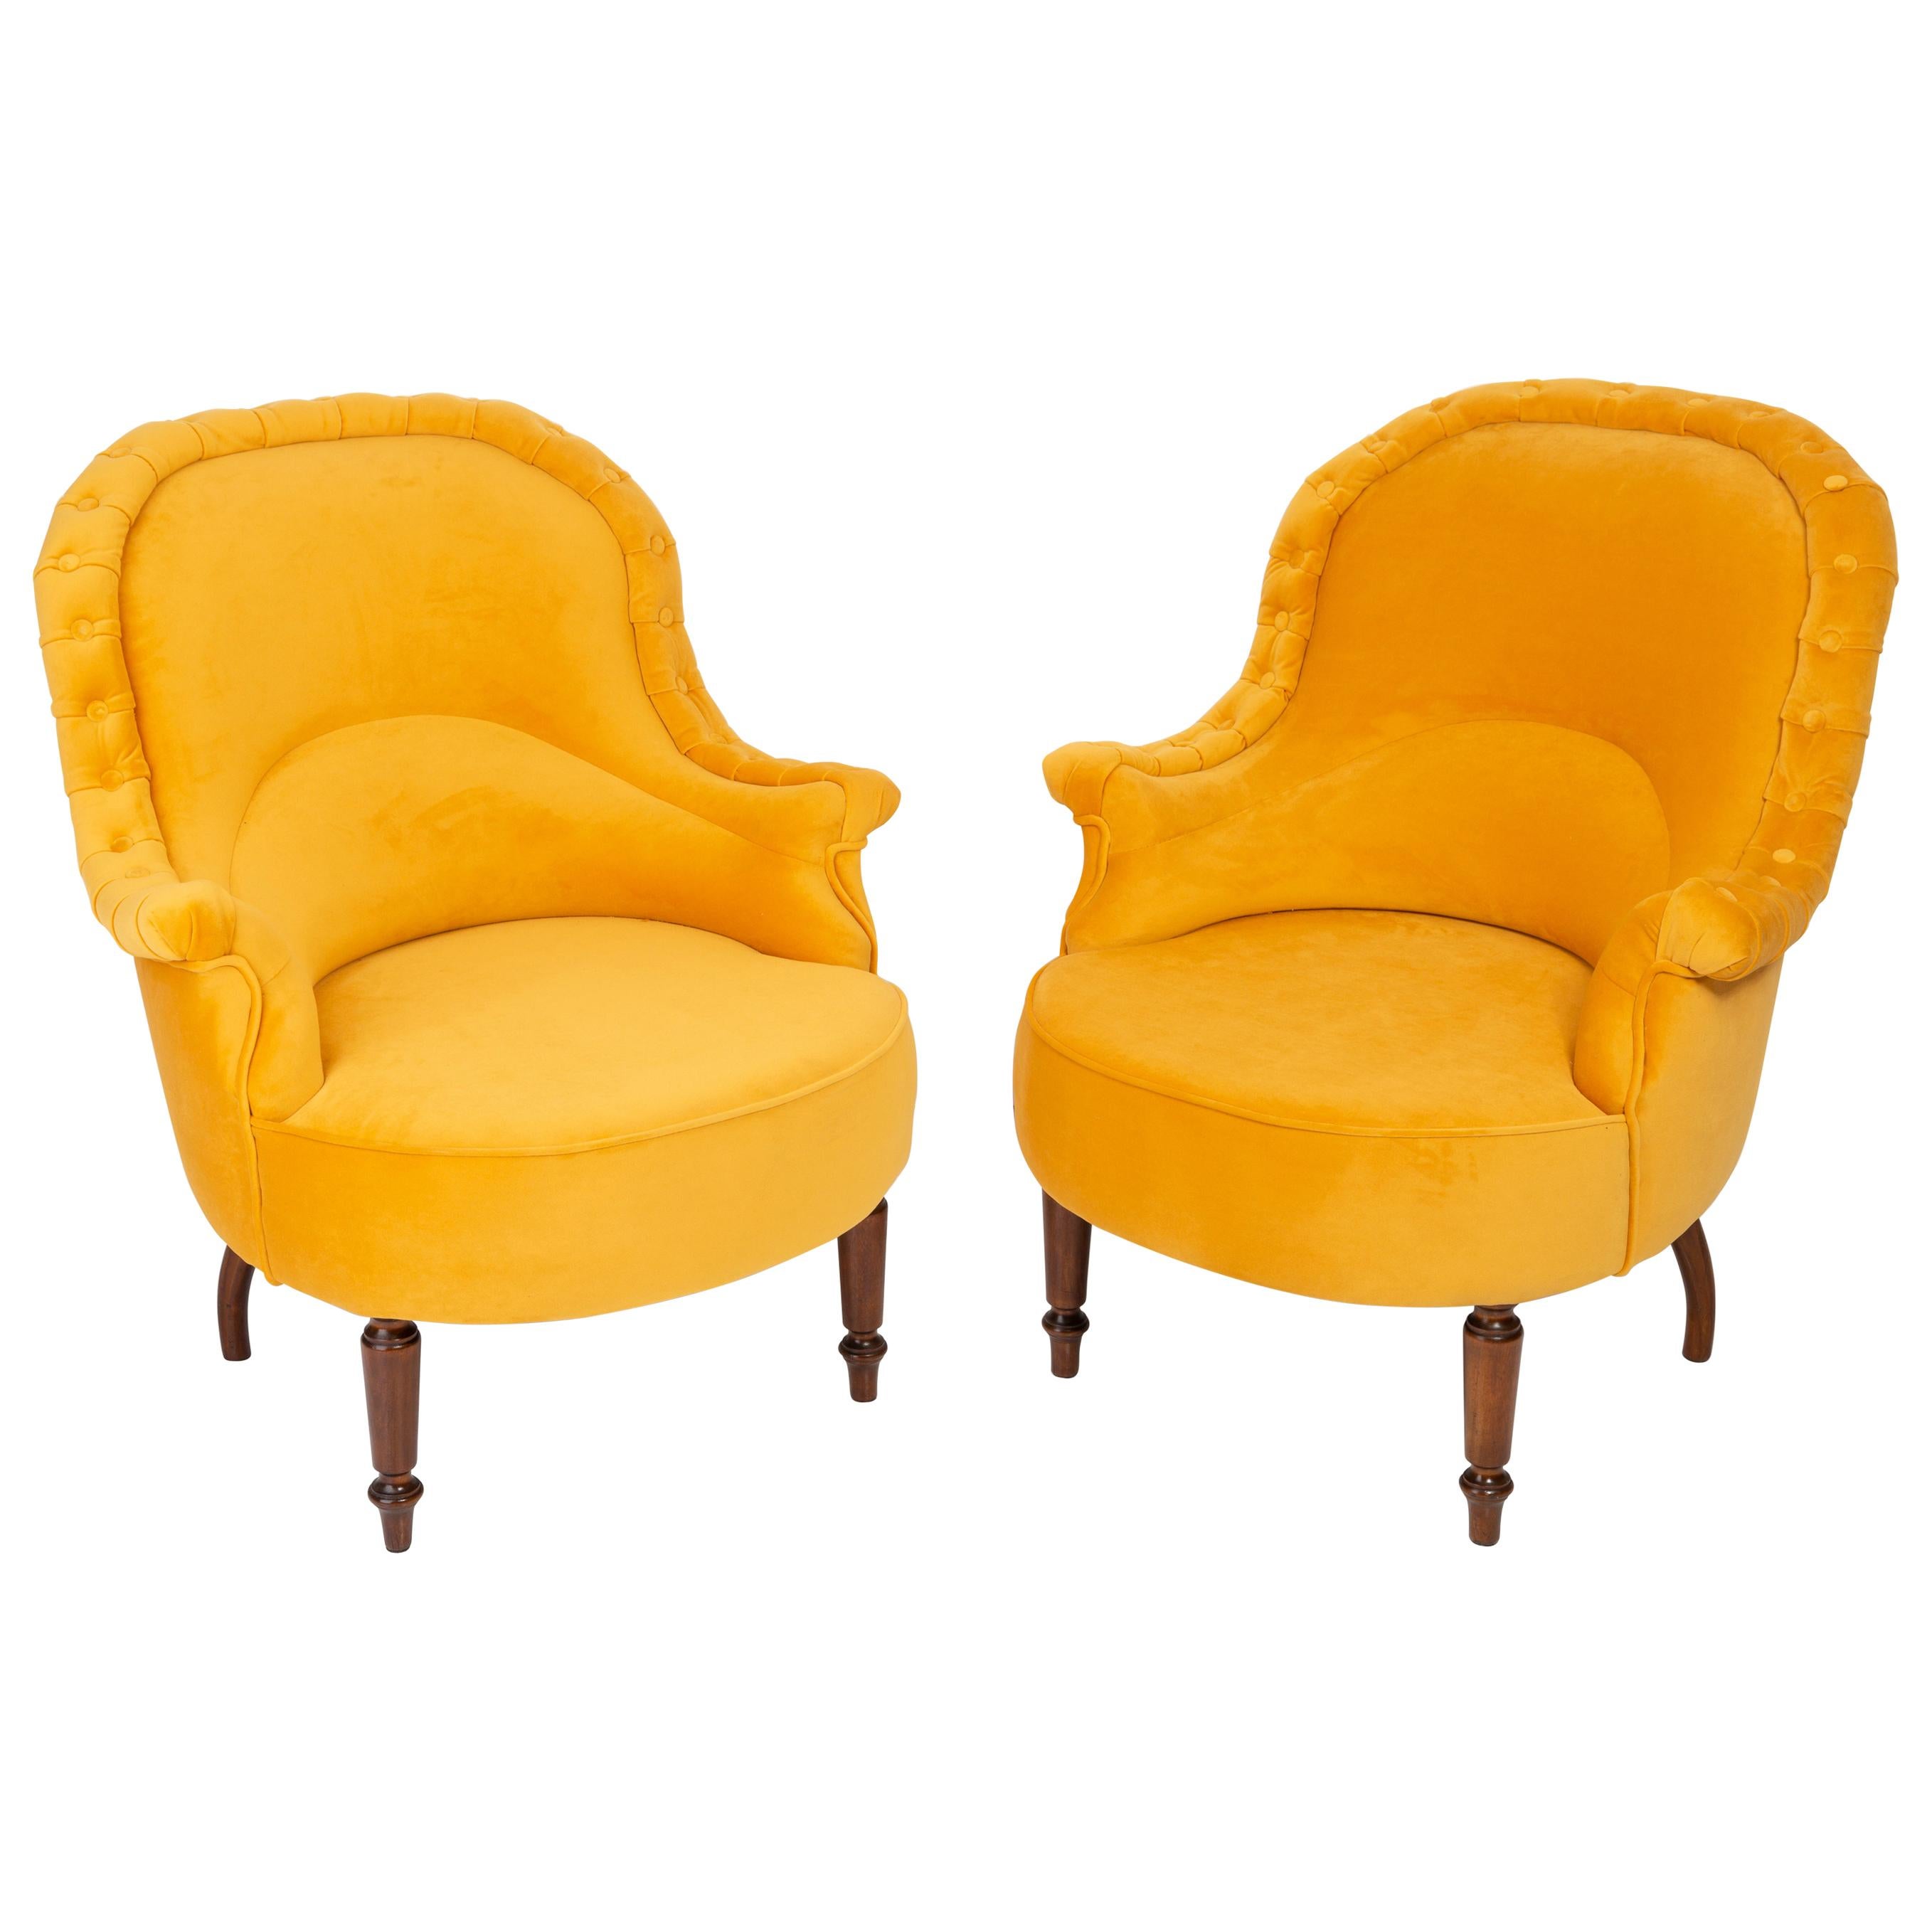 Pair of Unique Yellow Mustard Armchairs, 1930s, Germany For Sale